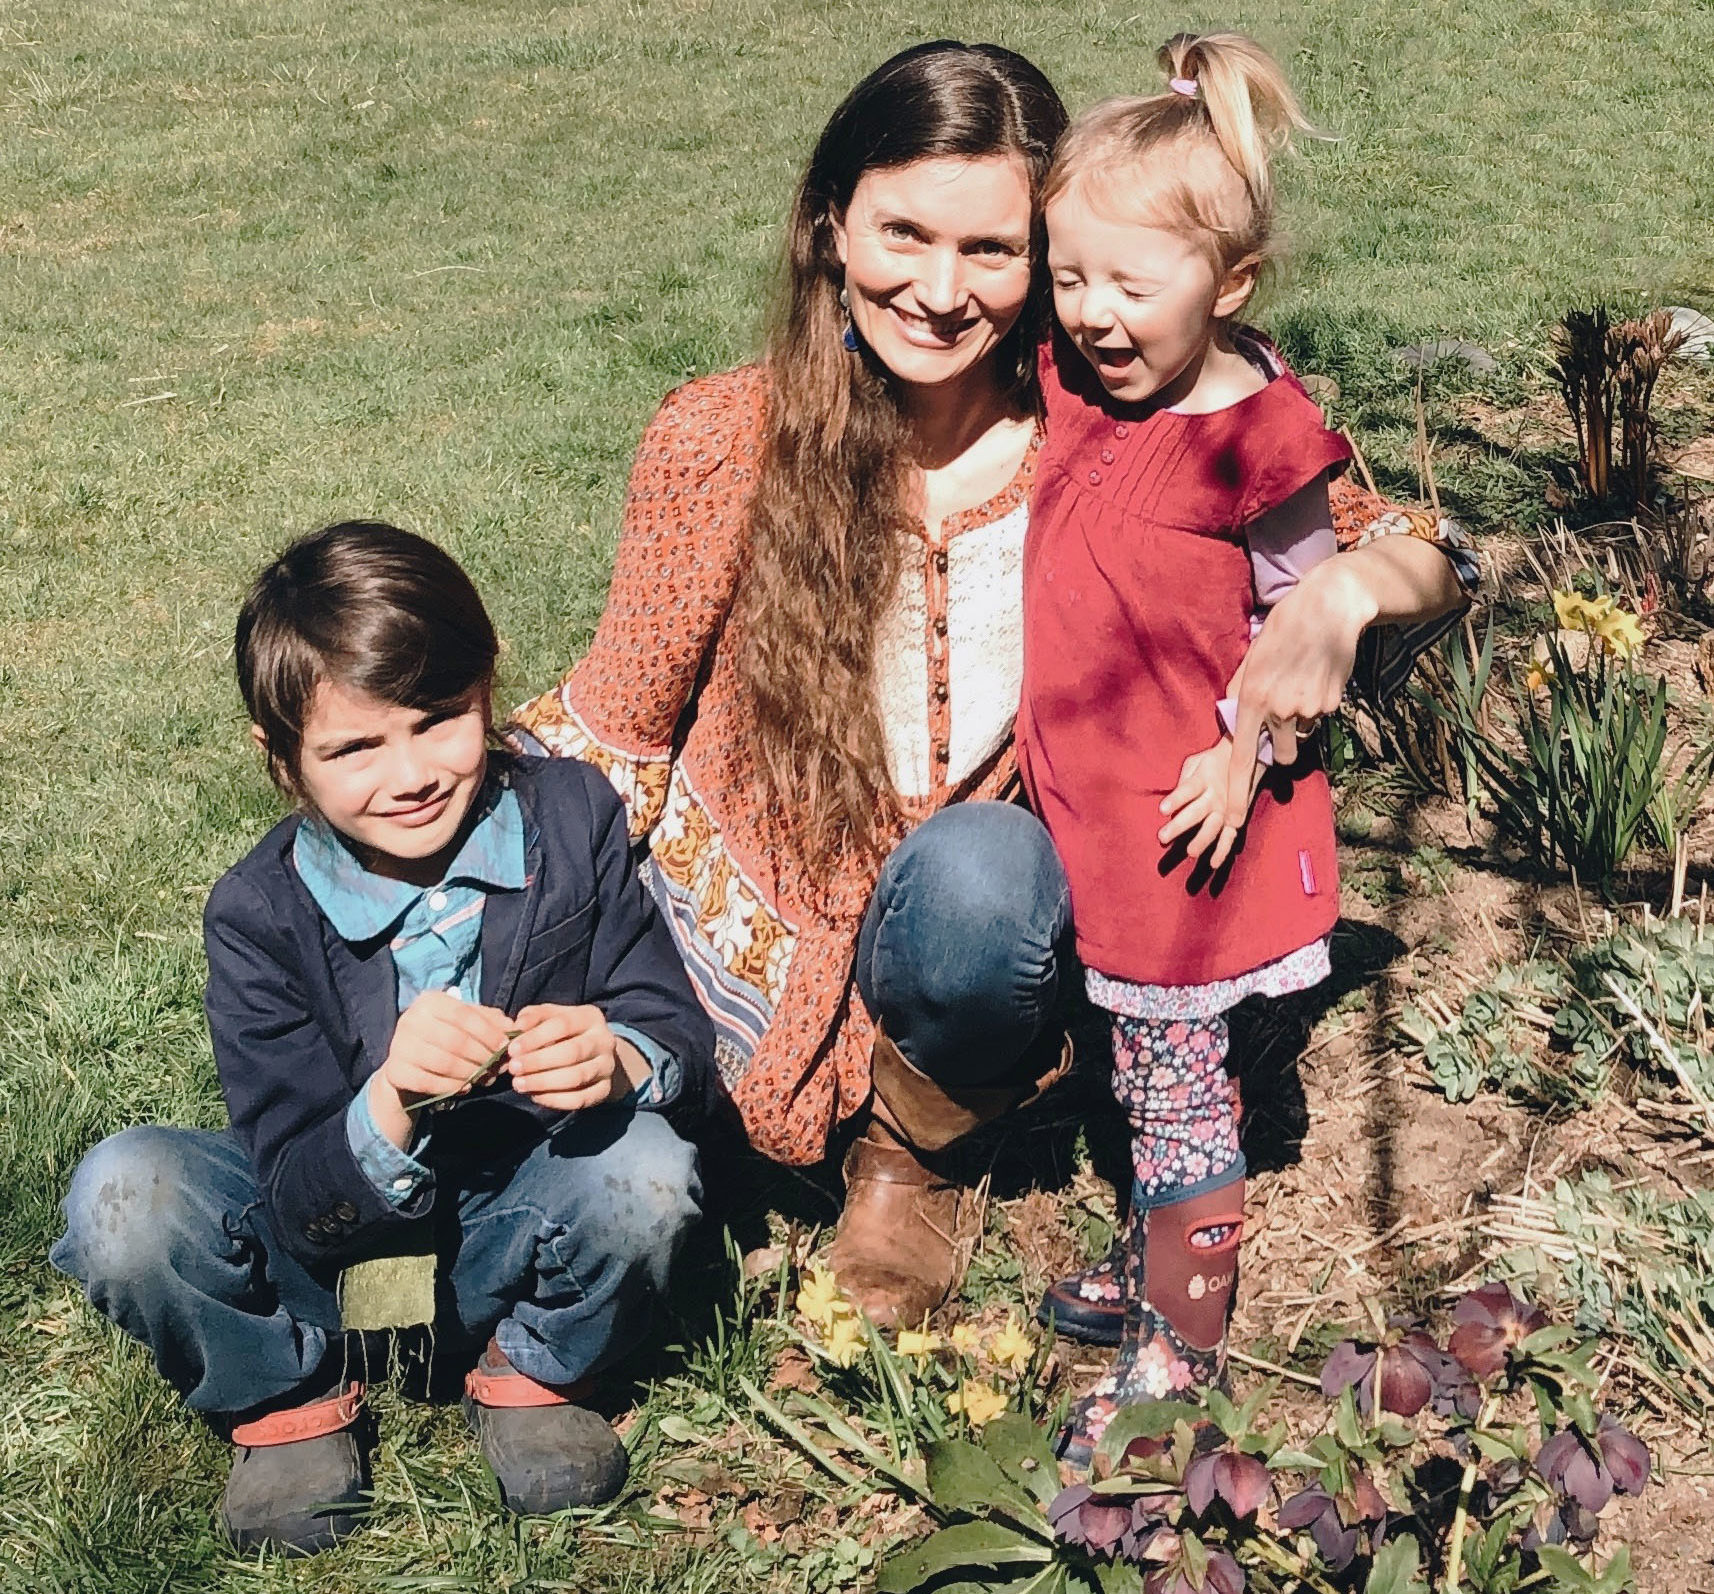 Megan Westgate, Executive Director, Non-GMO Project with her two young kids outdoors